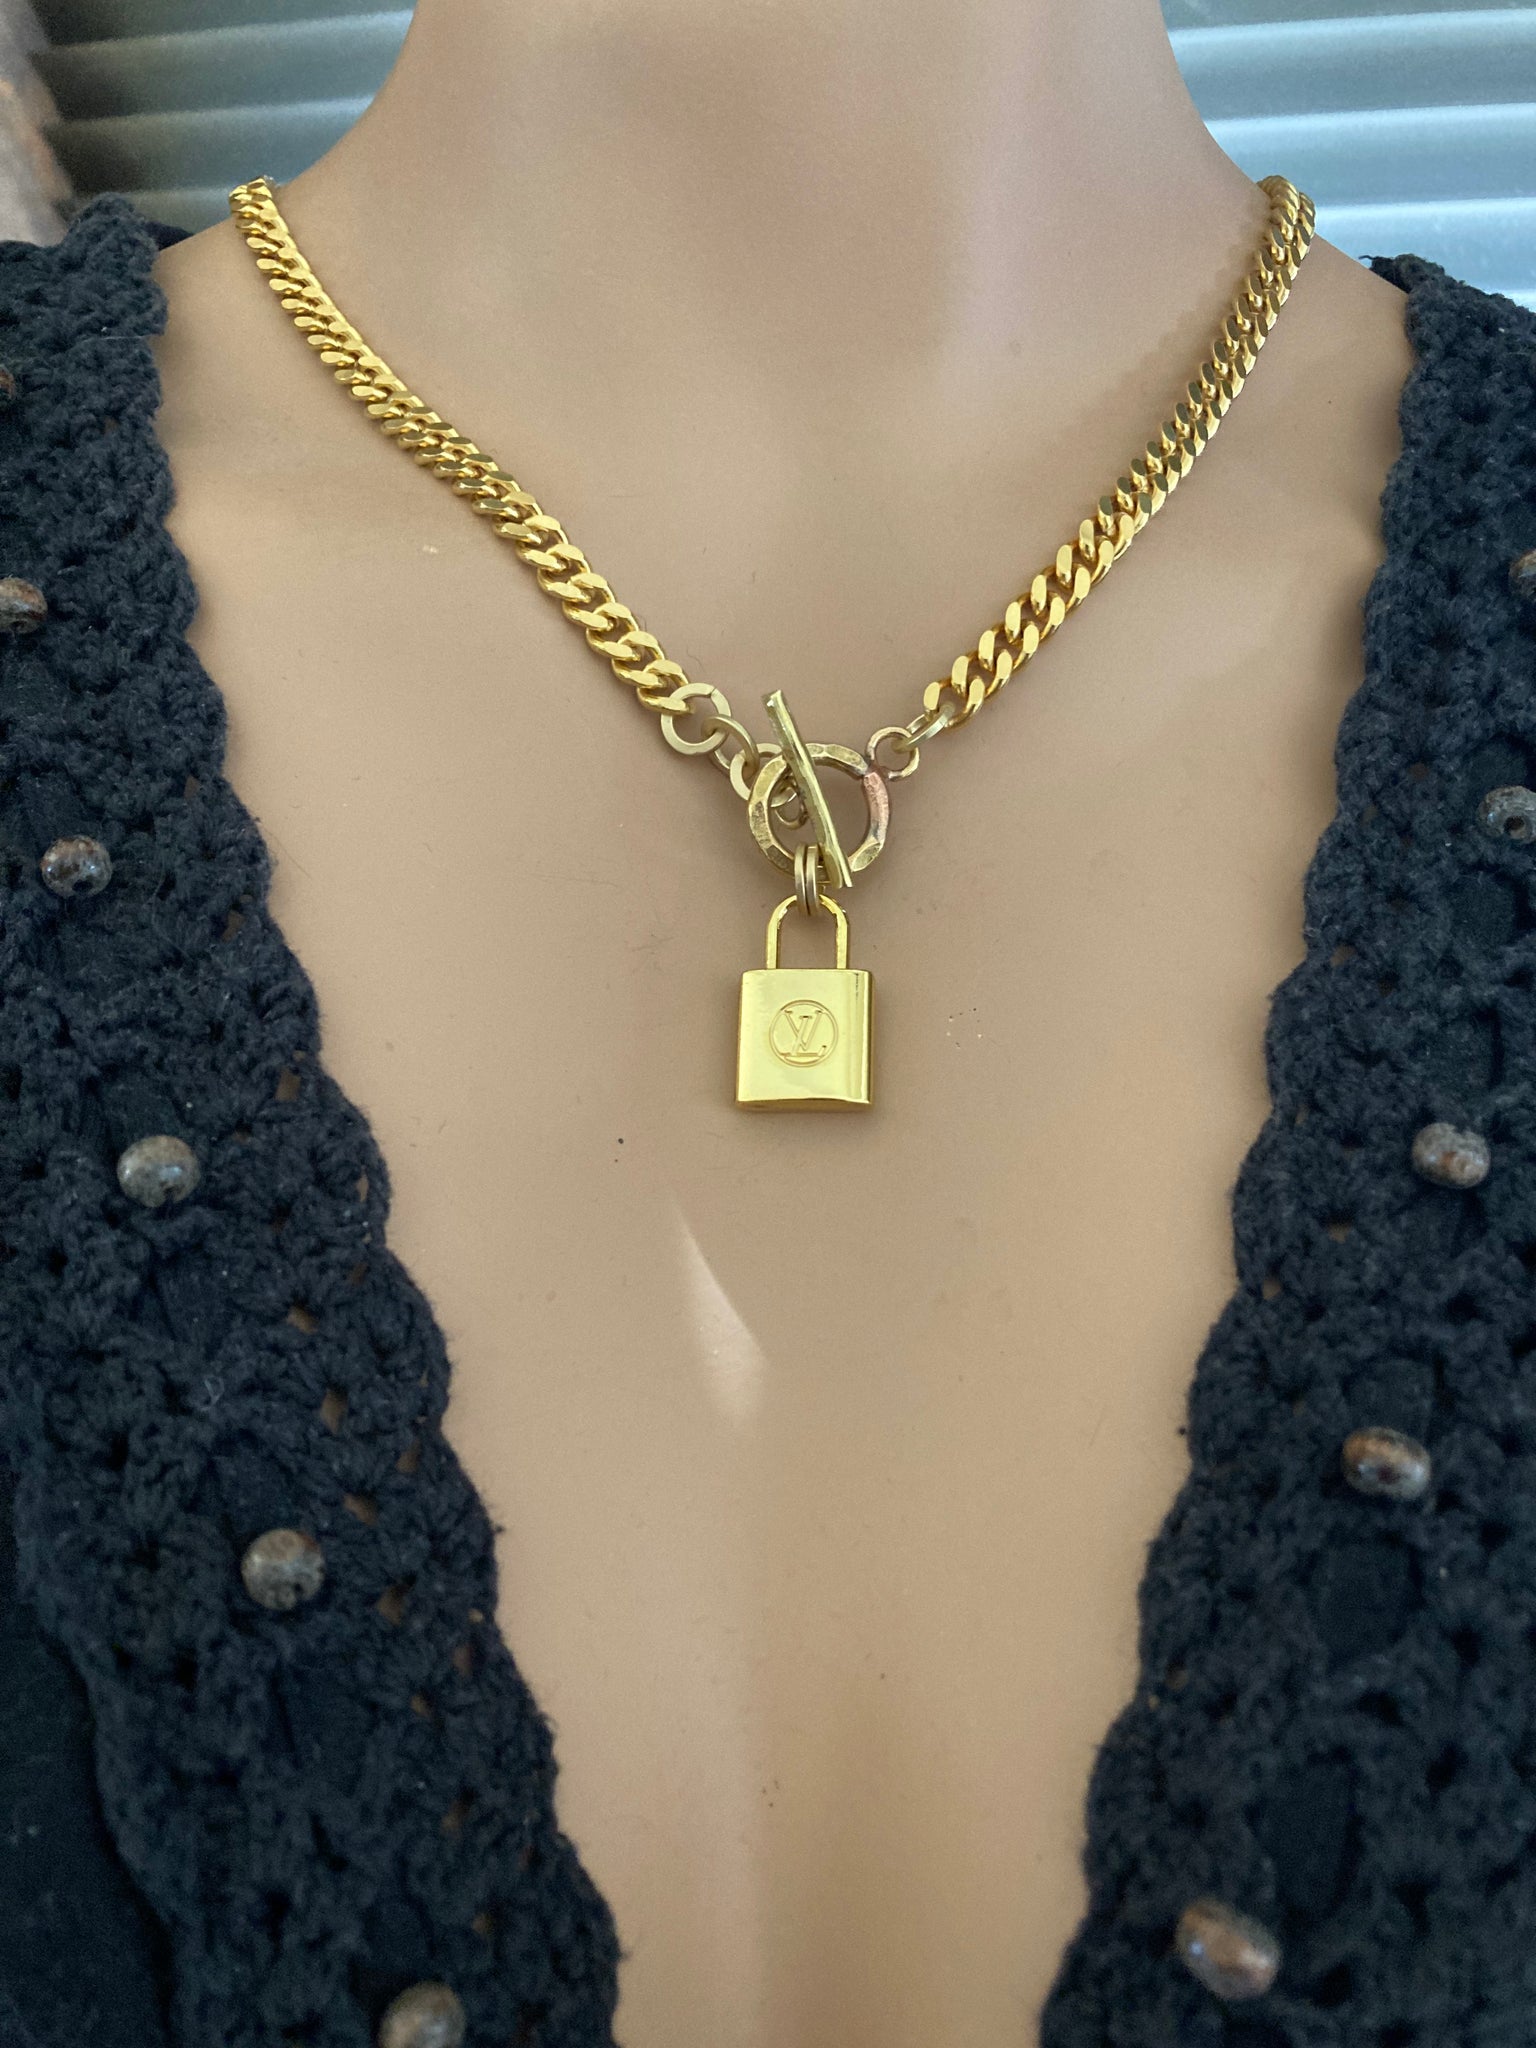 Louis Vuitton, Jewelry, Lv Lock Necklace